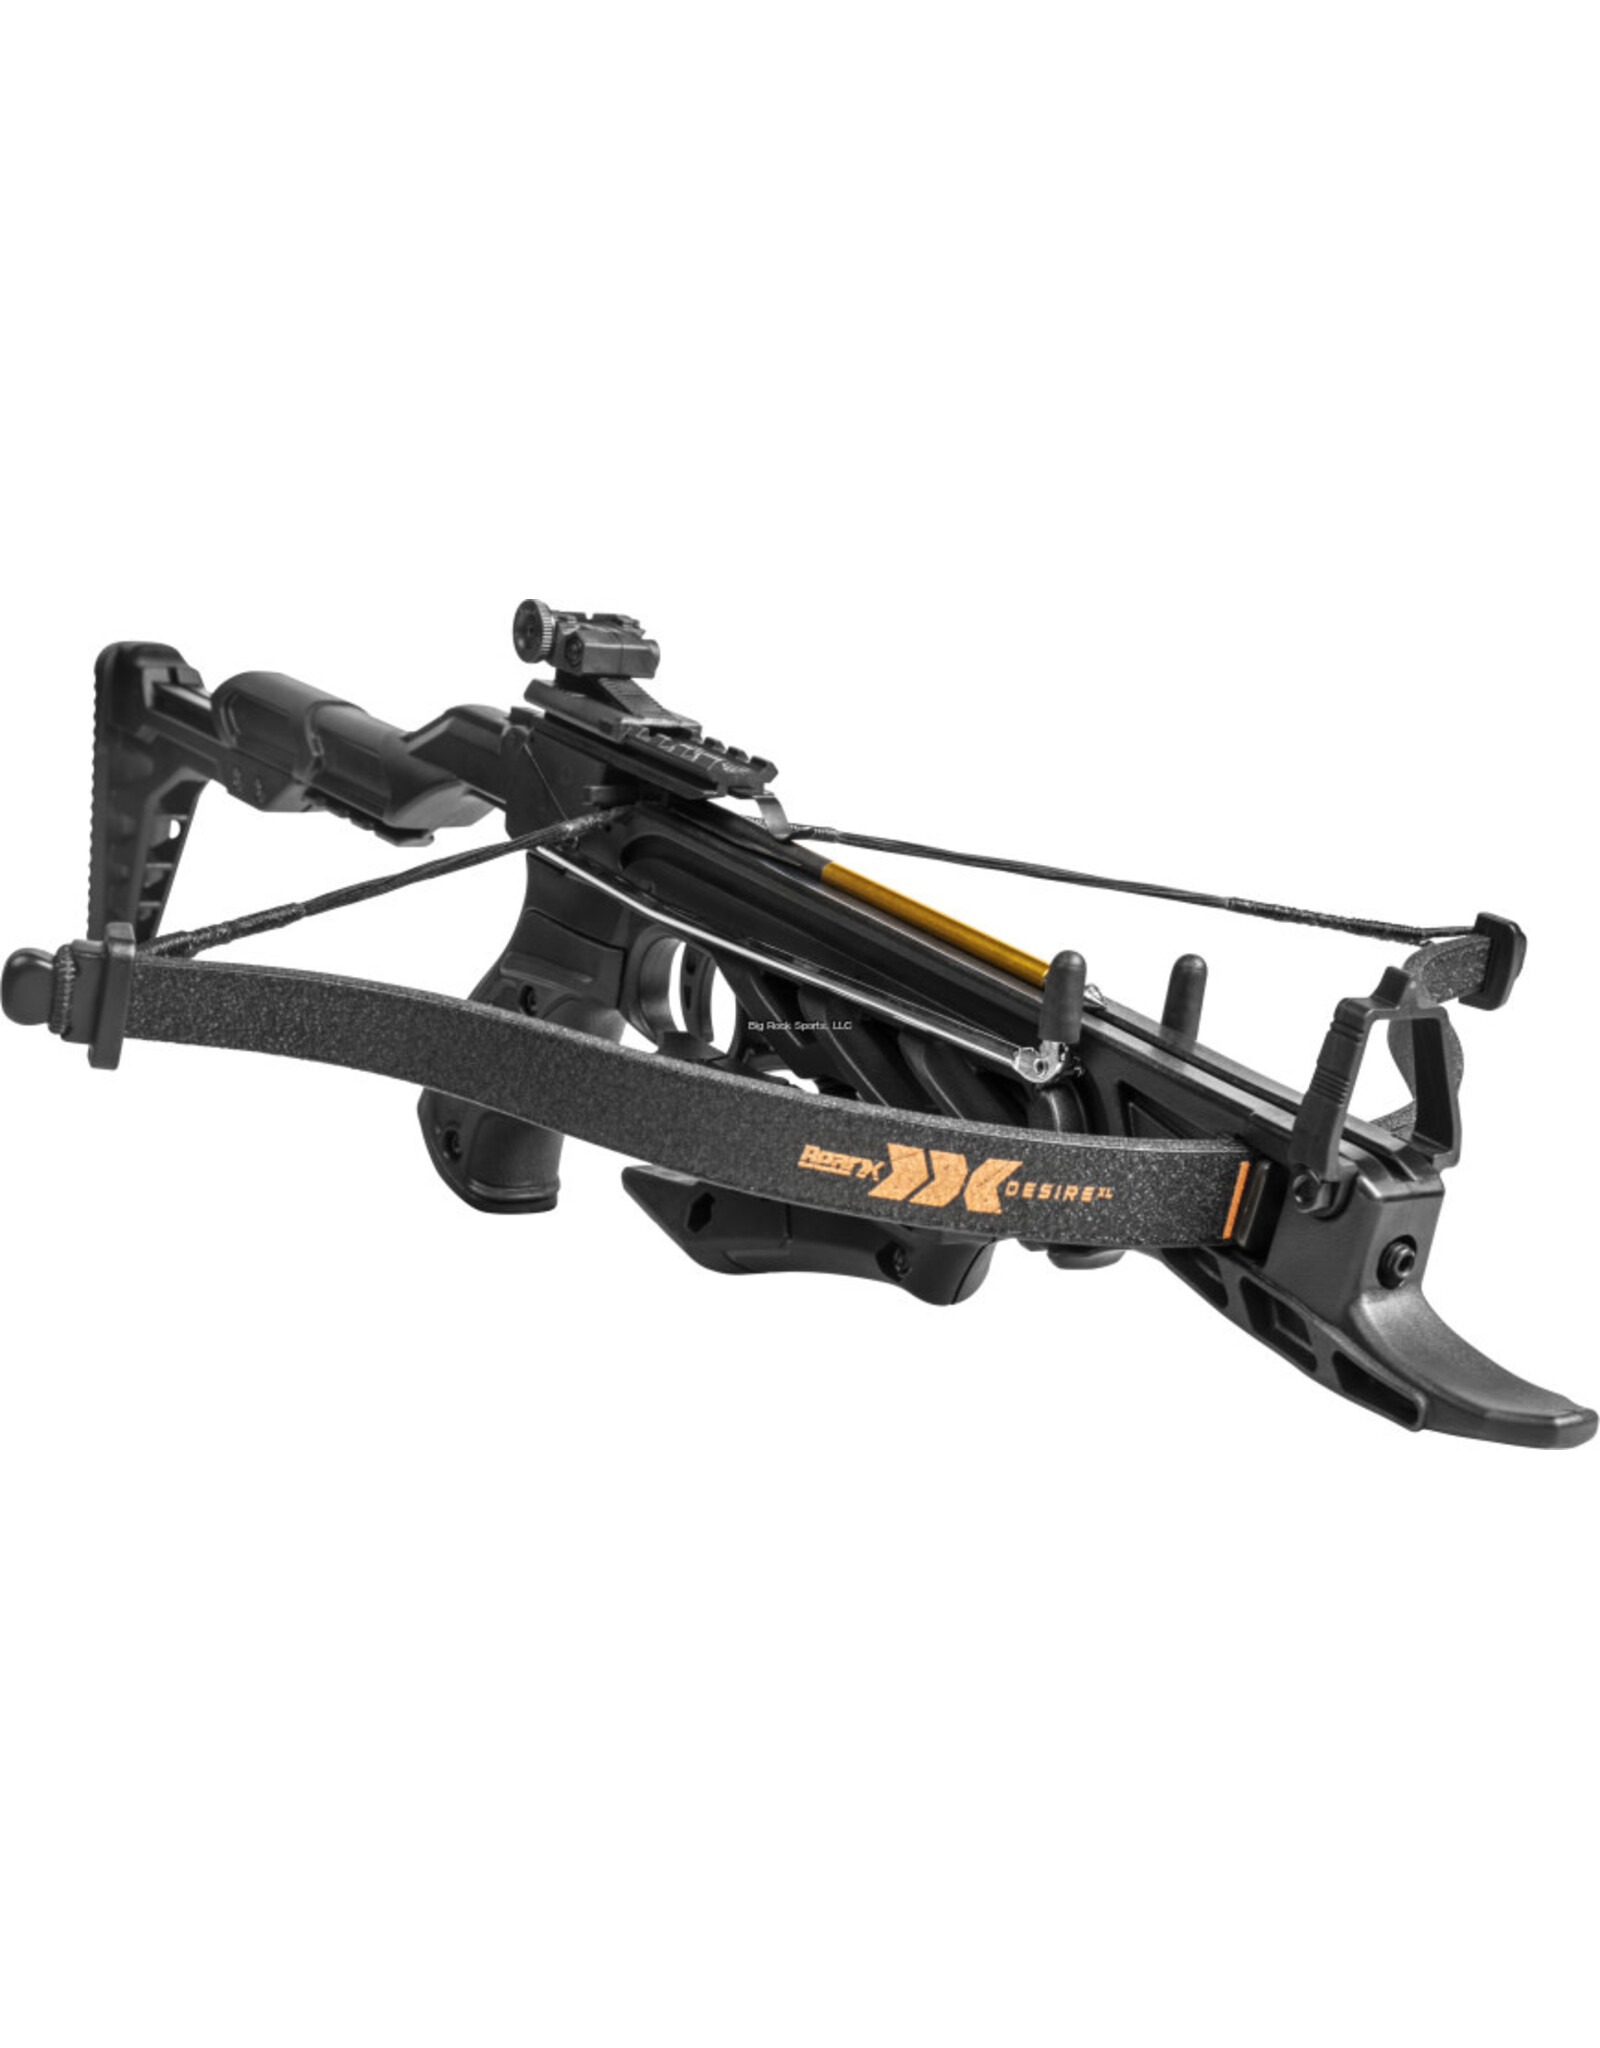 Bear Archery Bear Archery AC90A0A360 Desire XL Compact Pistol Crossbow, Self Cocking Arm , up to 175 Fps, Includes Three Bolts, Canada Legal